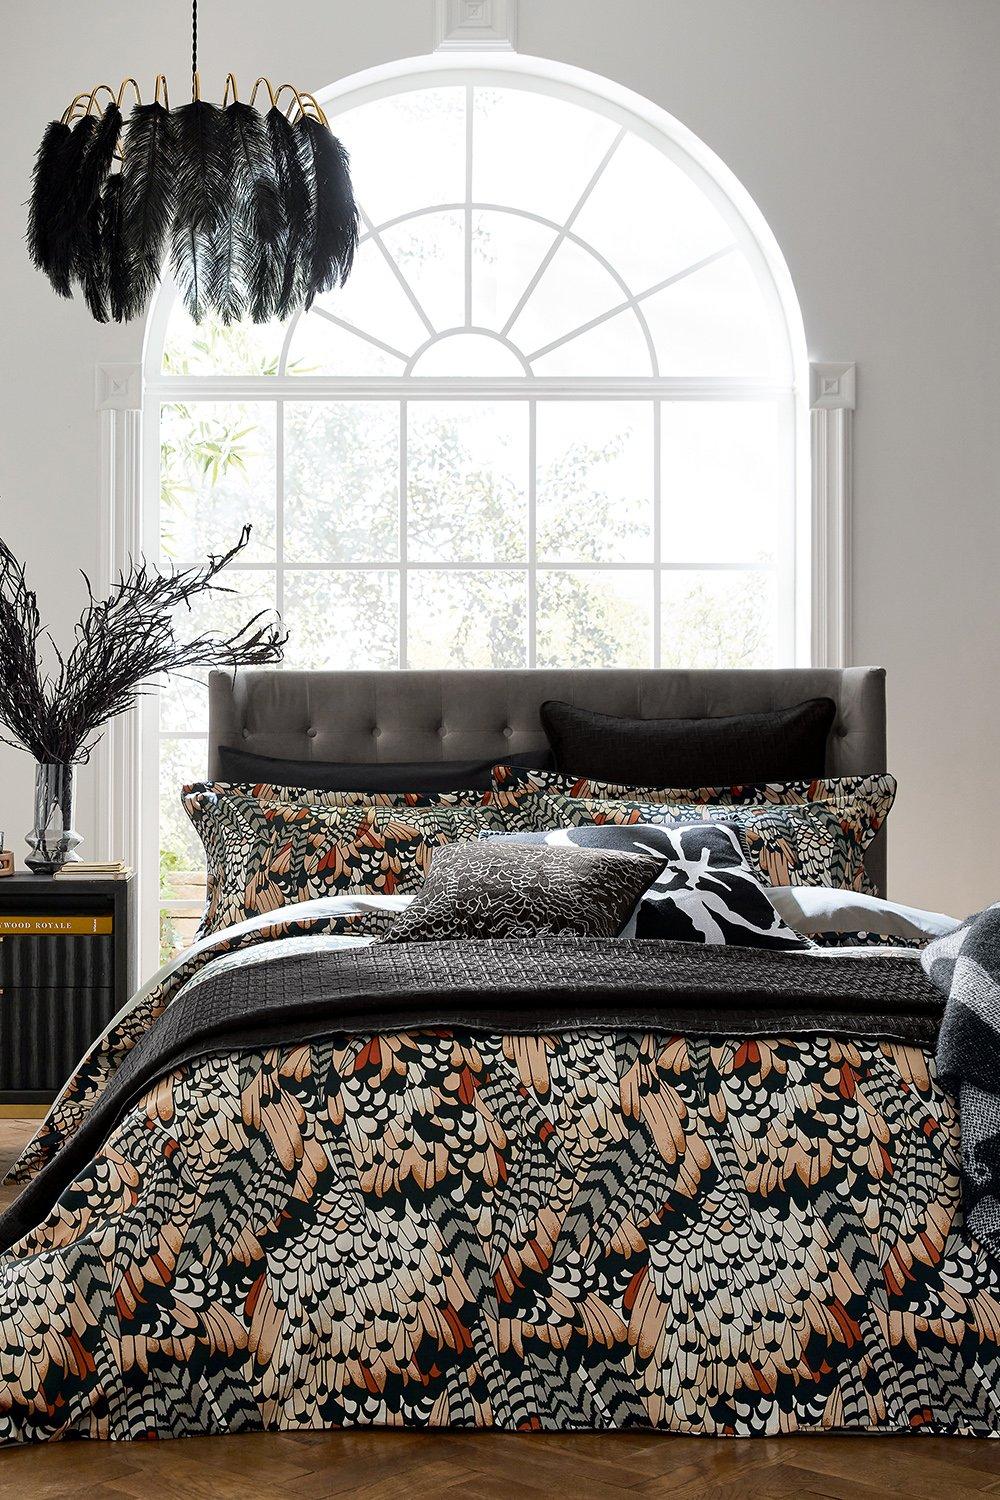 'Feathers' Duvet Cover